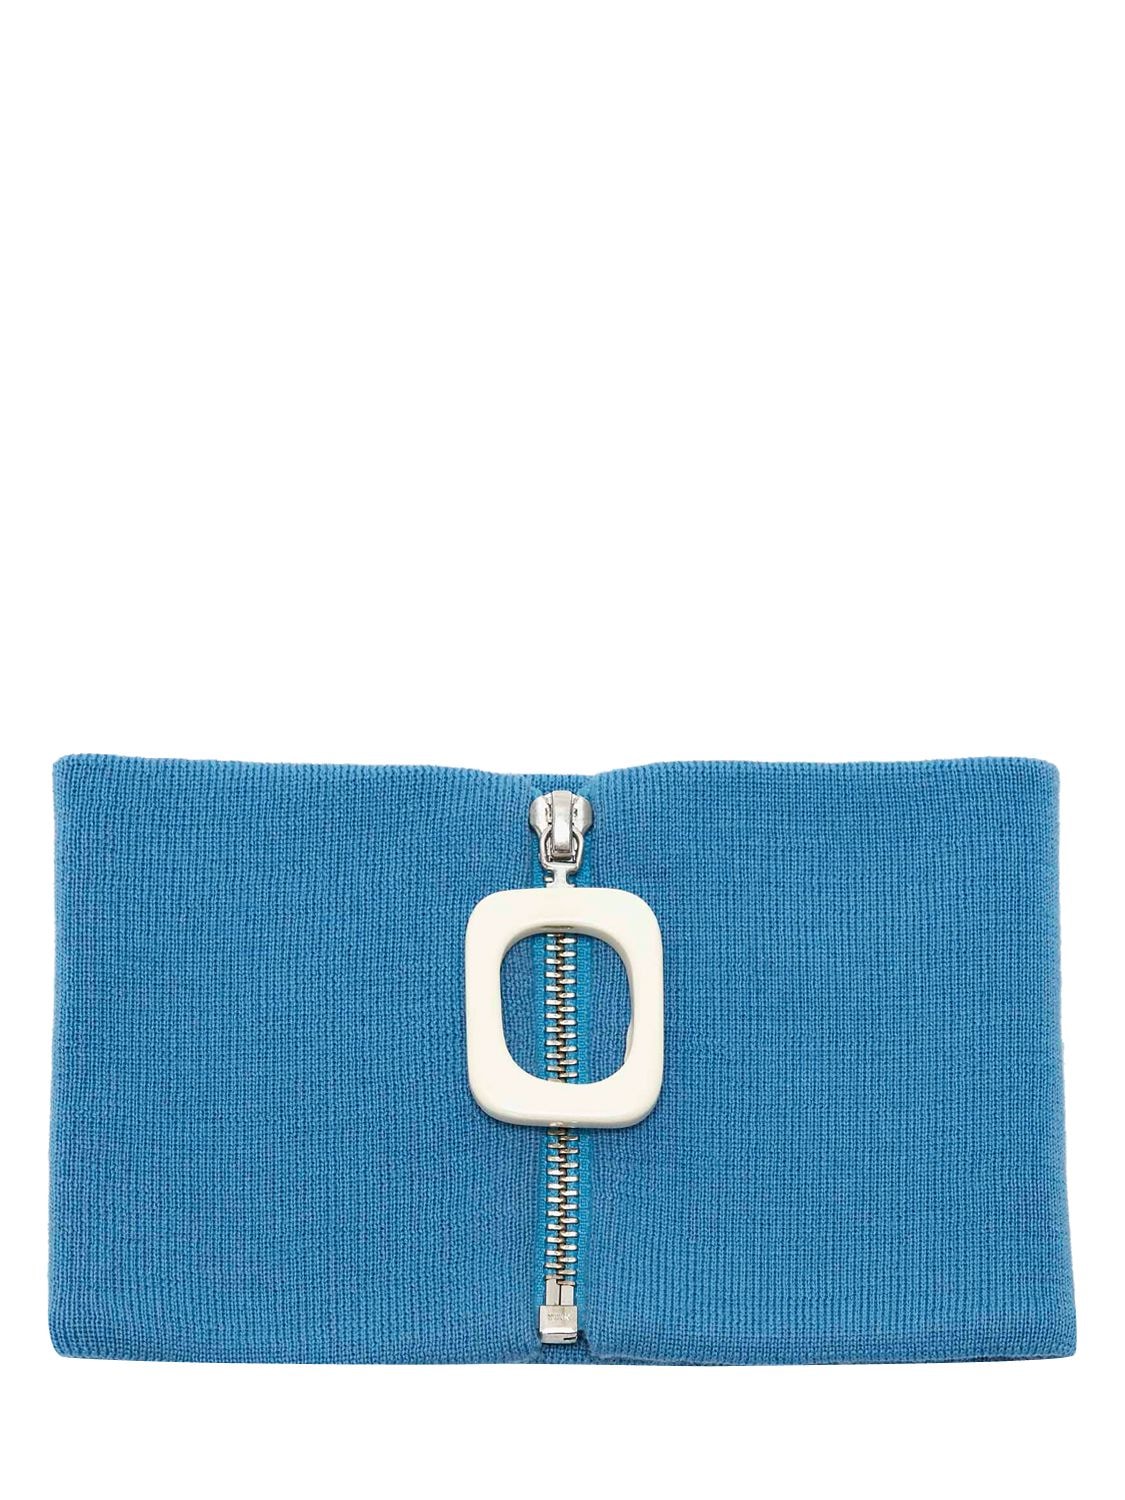 Image of Wool Knit Zip-up Neckband